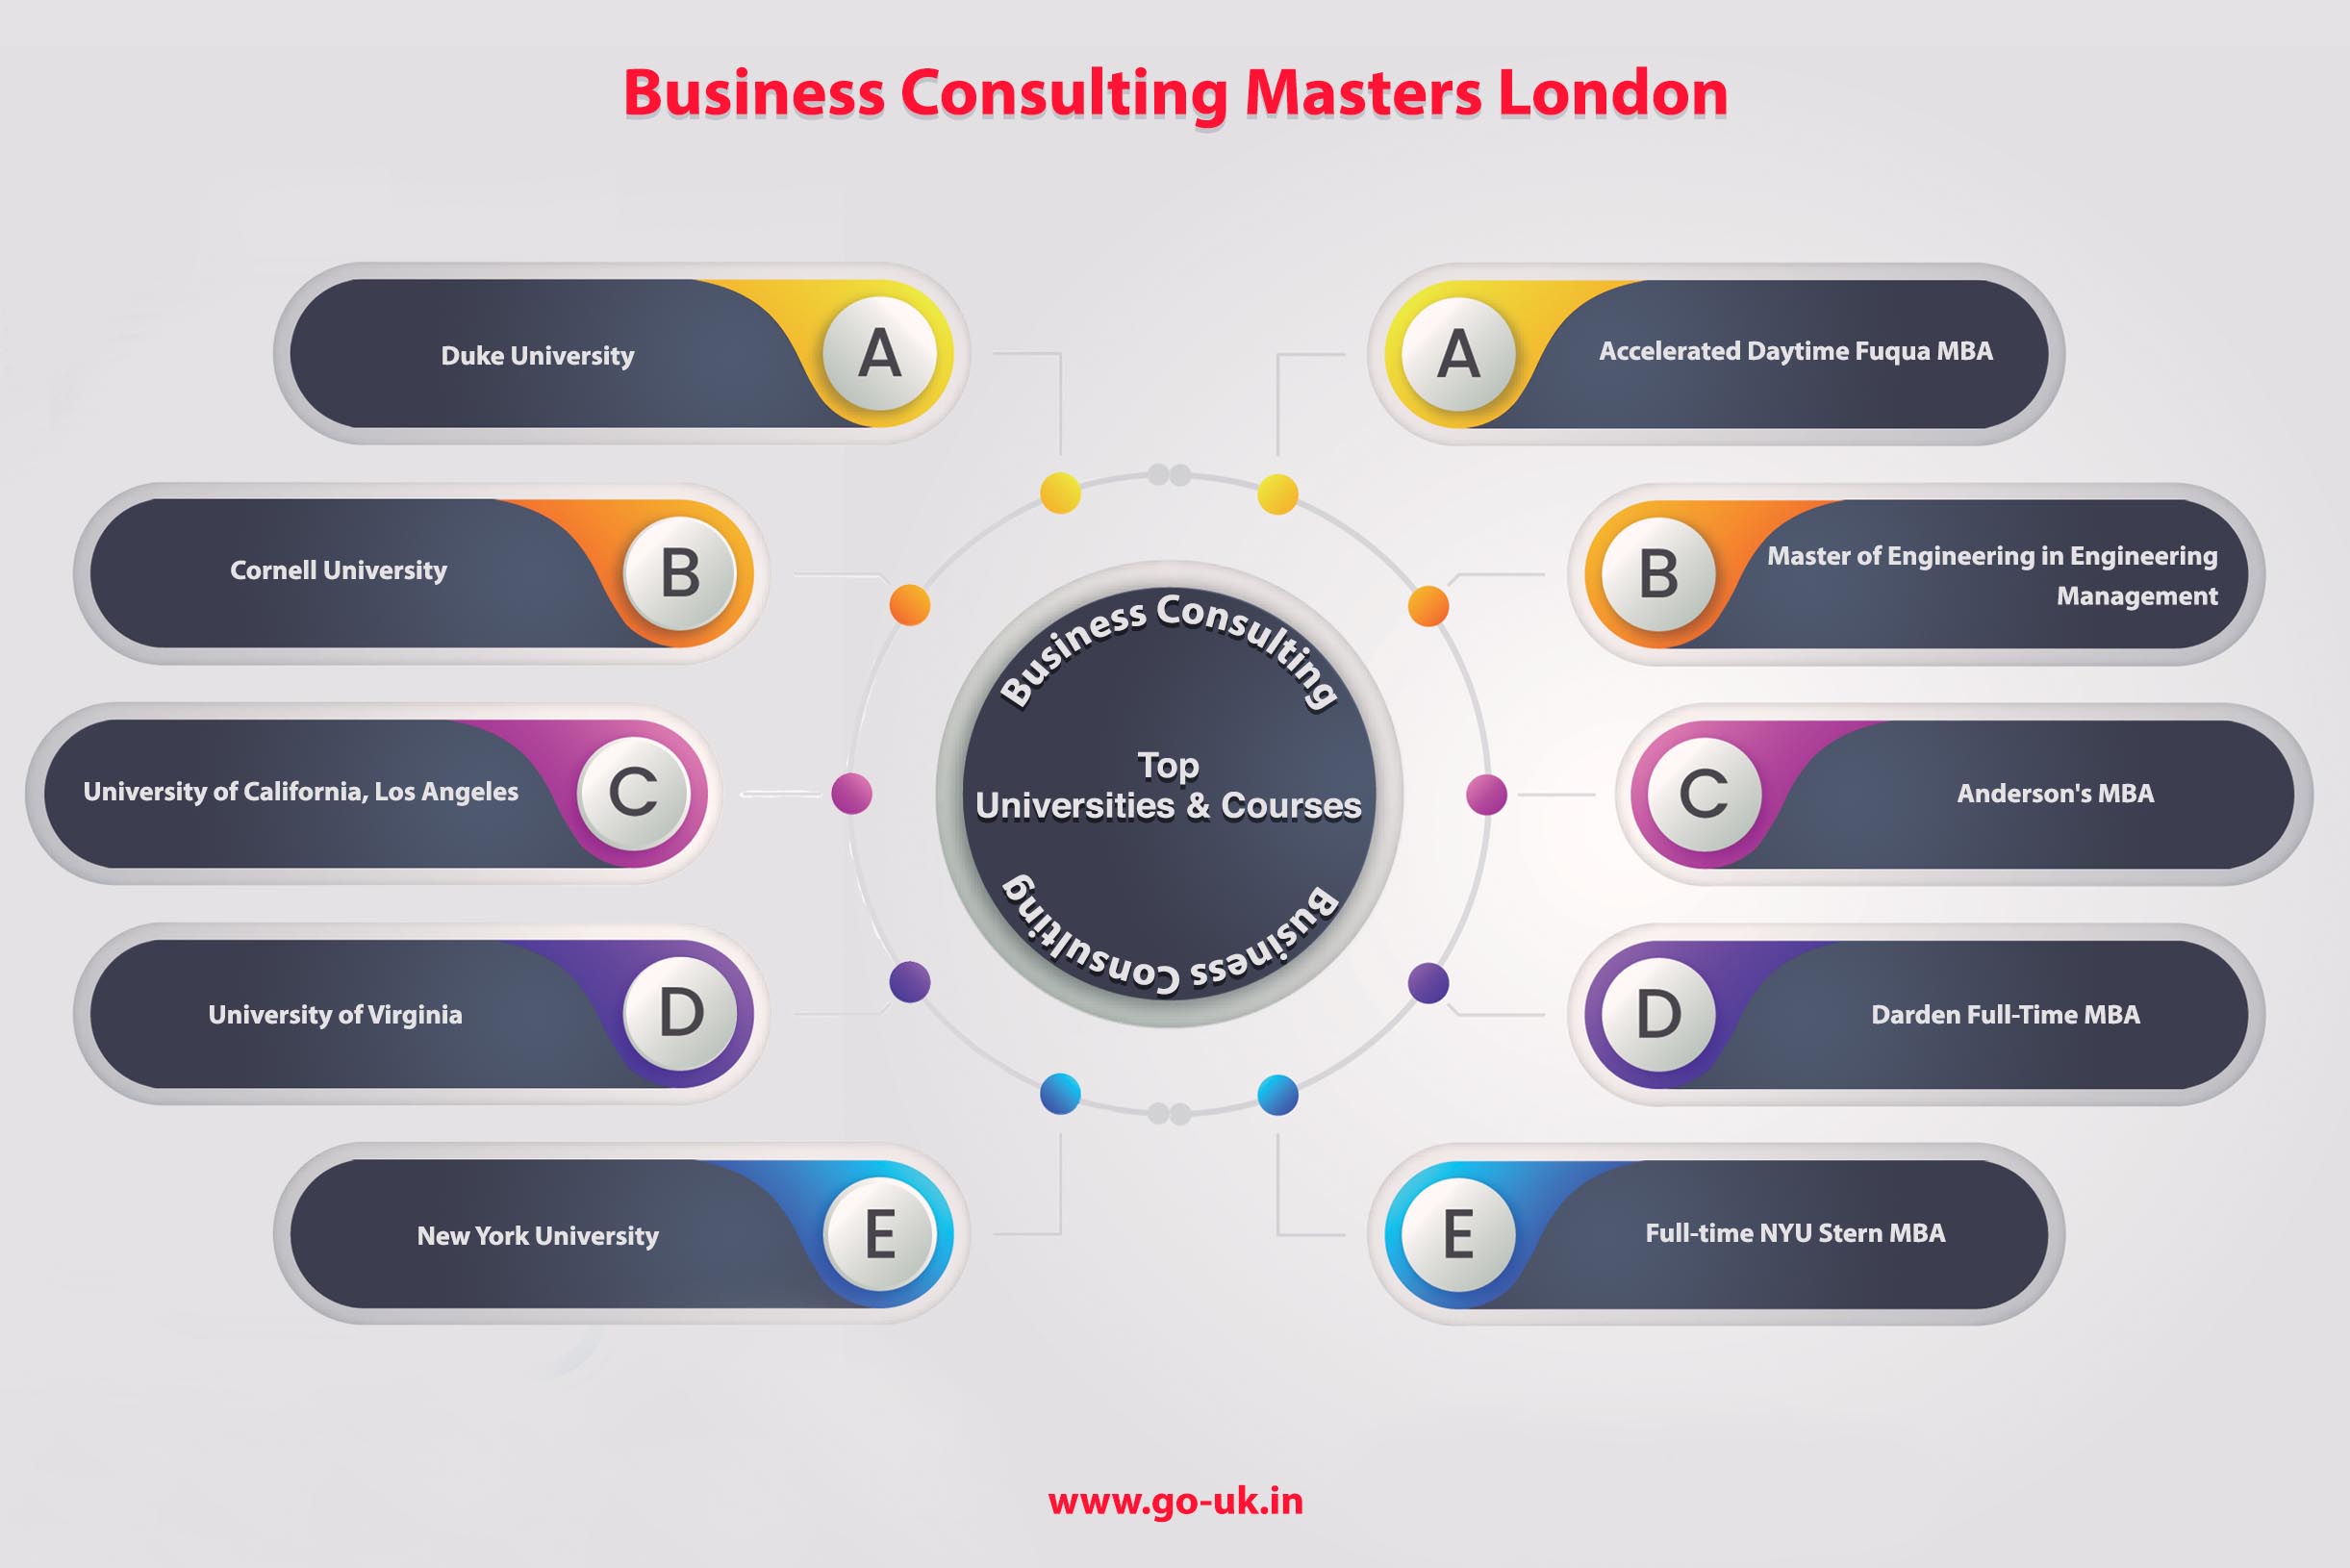 Business Consulting Masters London